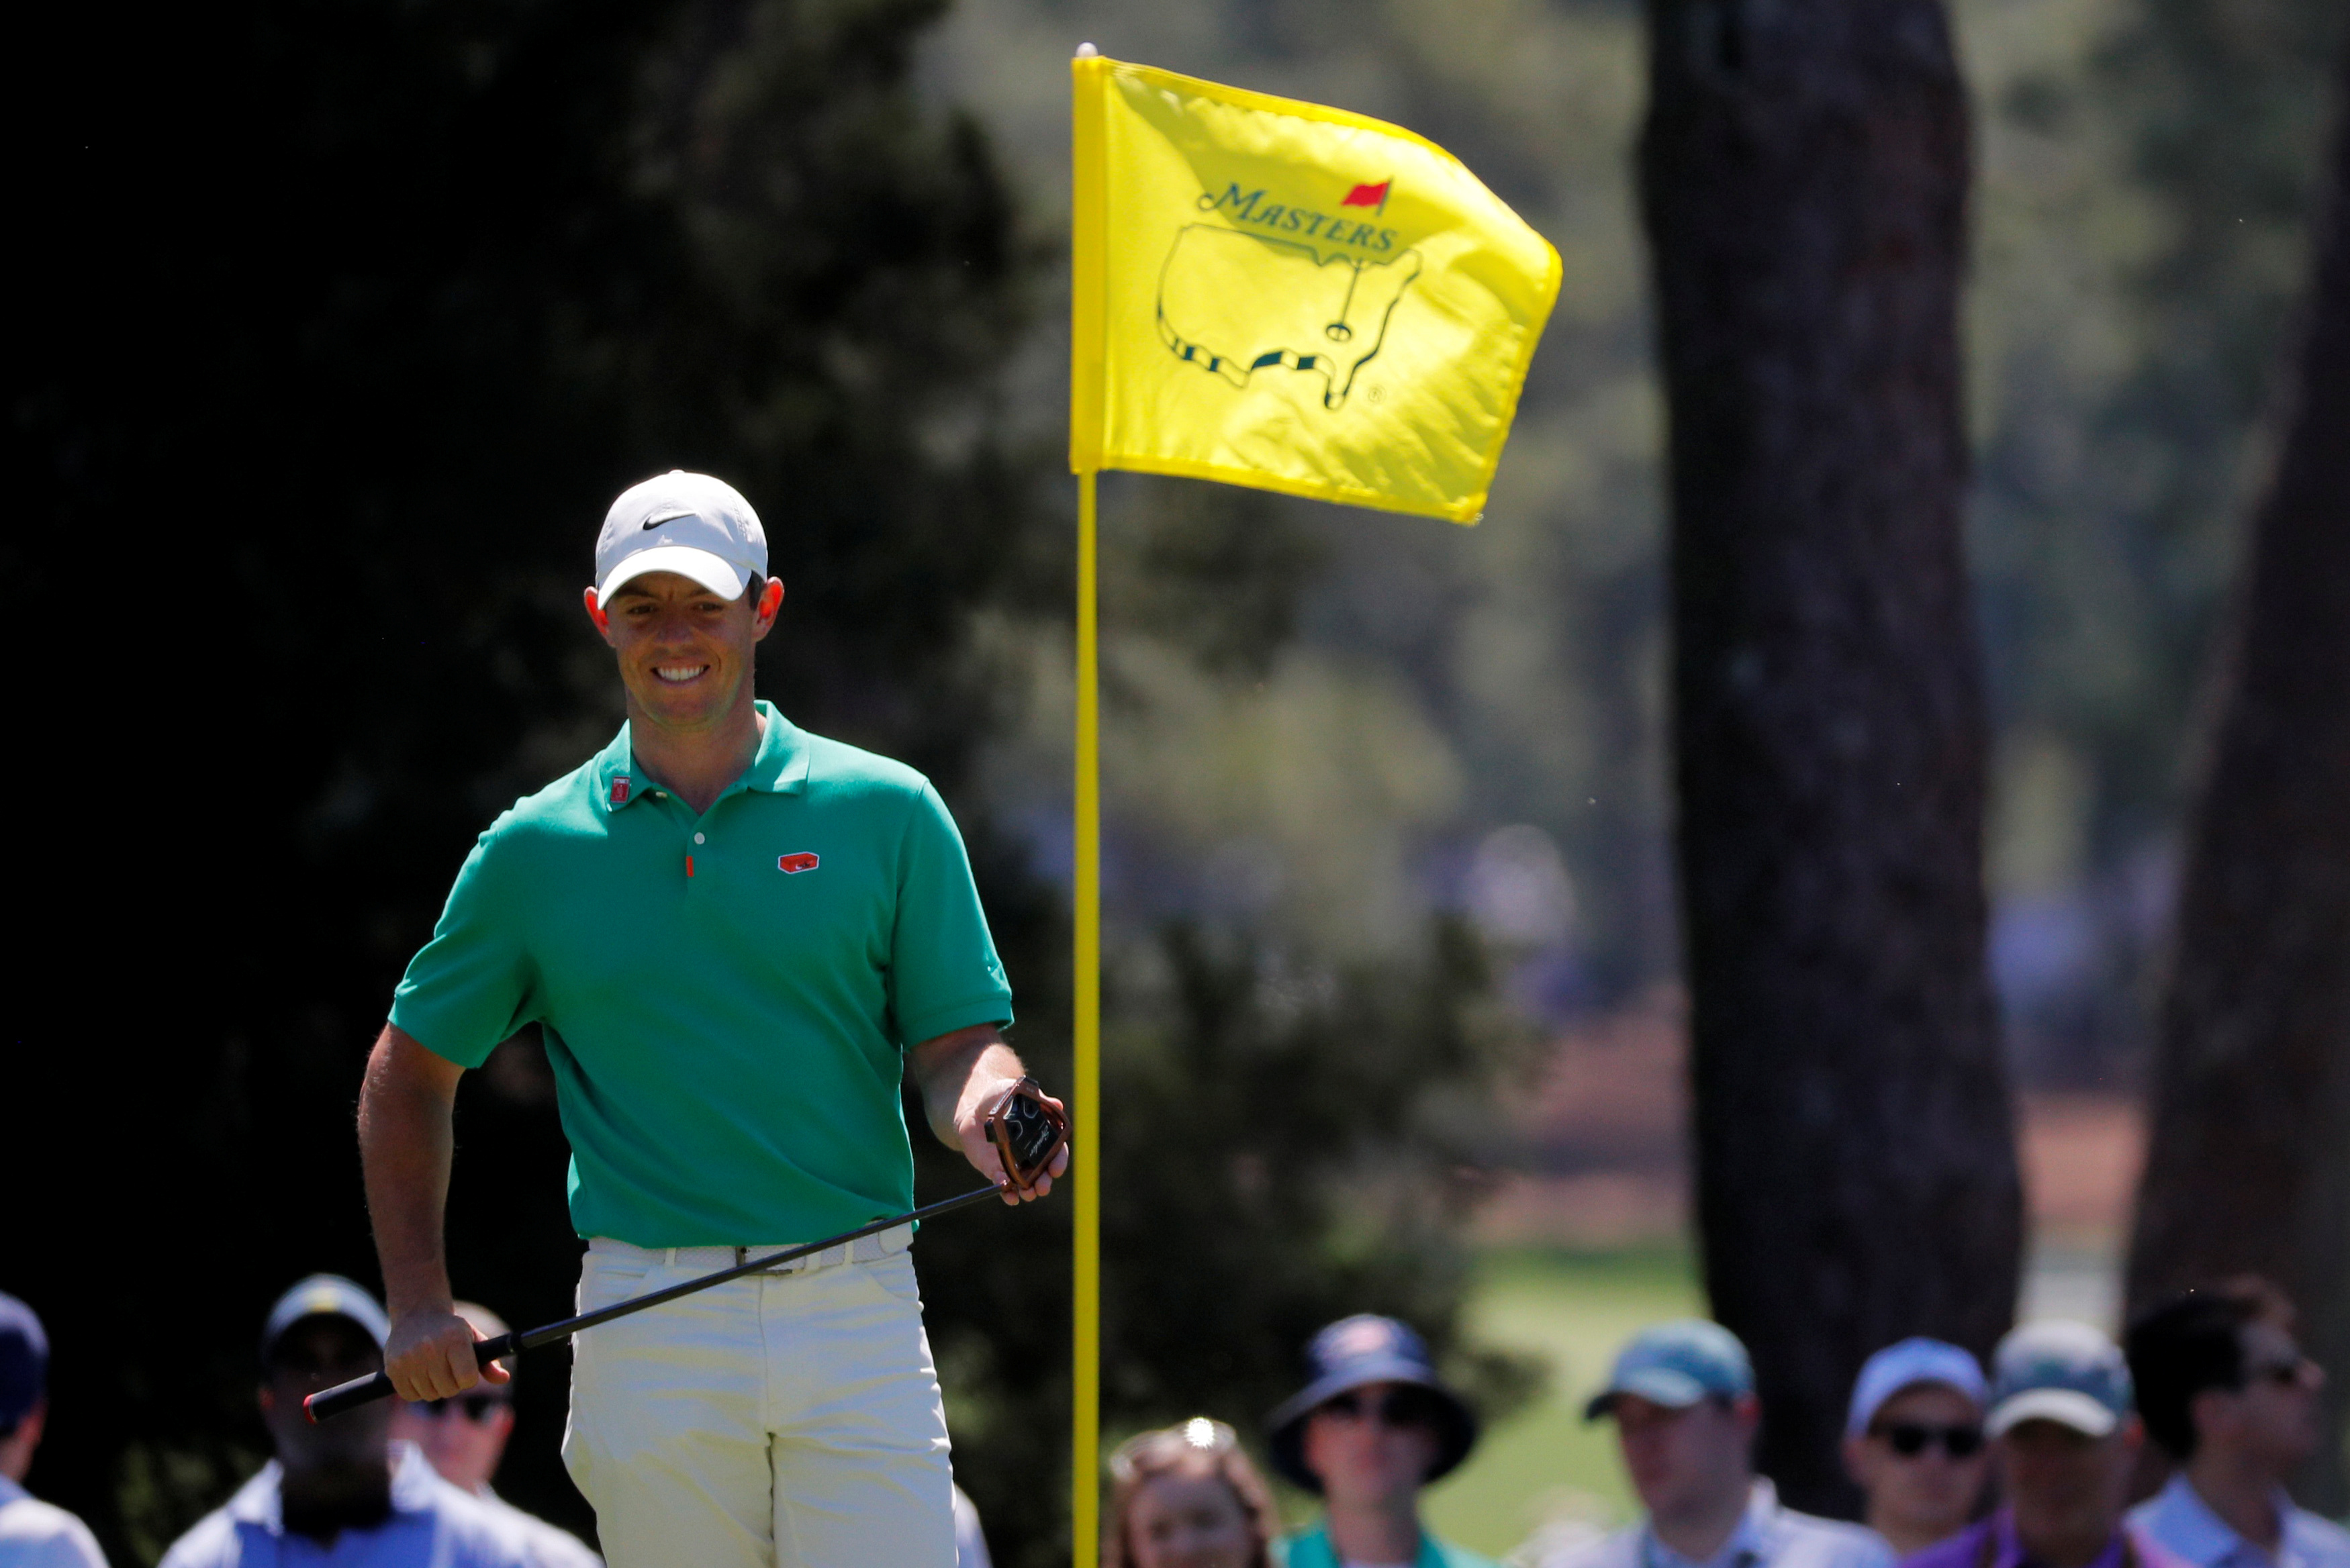 RUMOUR: The Masters to be played in November in schedule shake-up